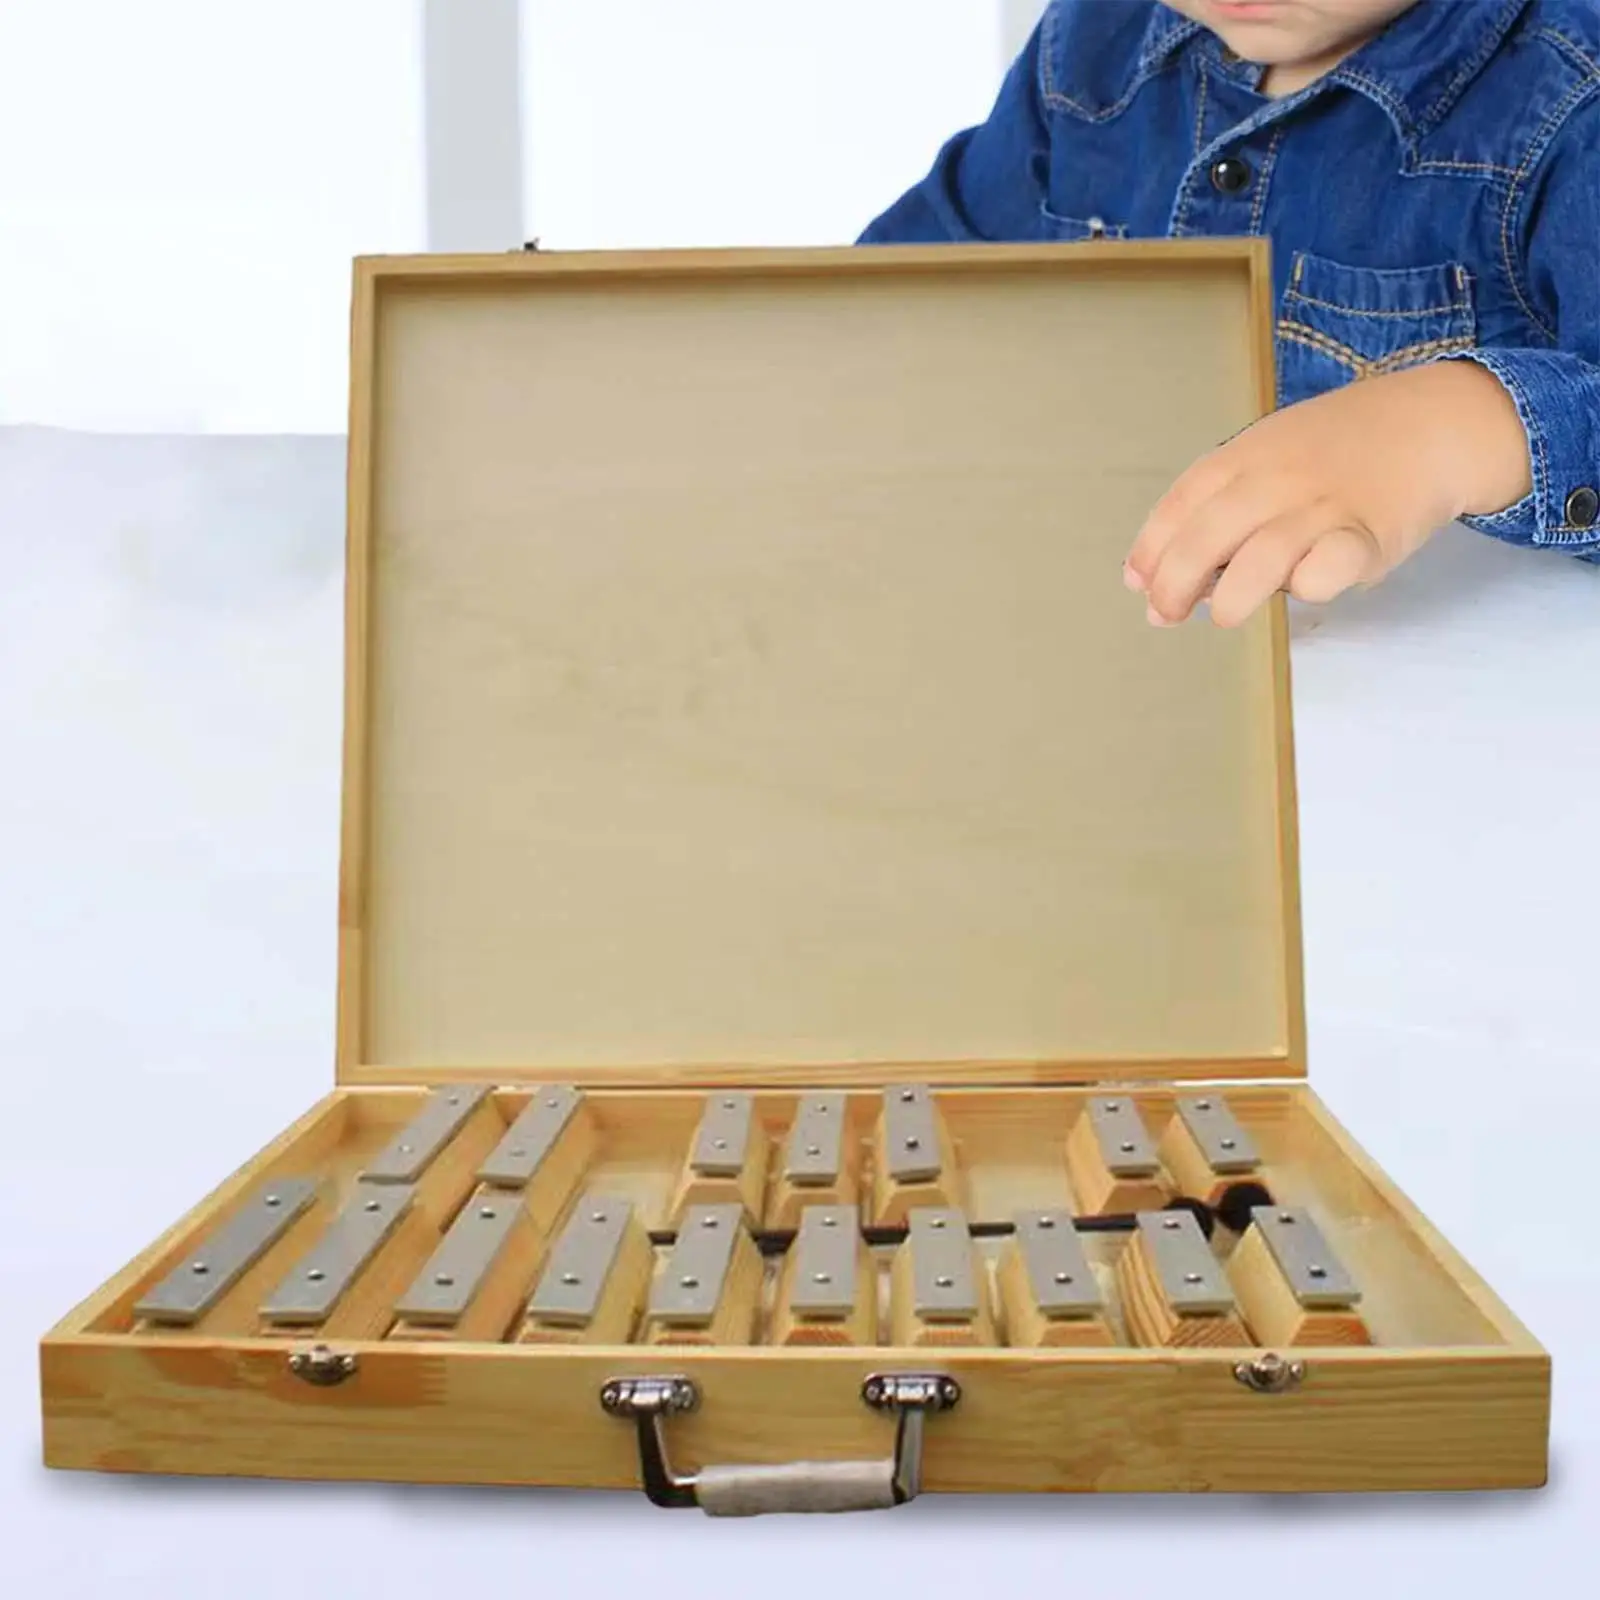 Xylophone Preschool Learning Musical Toy 17 Notes Glockenspiel Xylophone